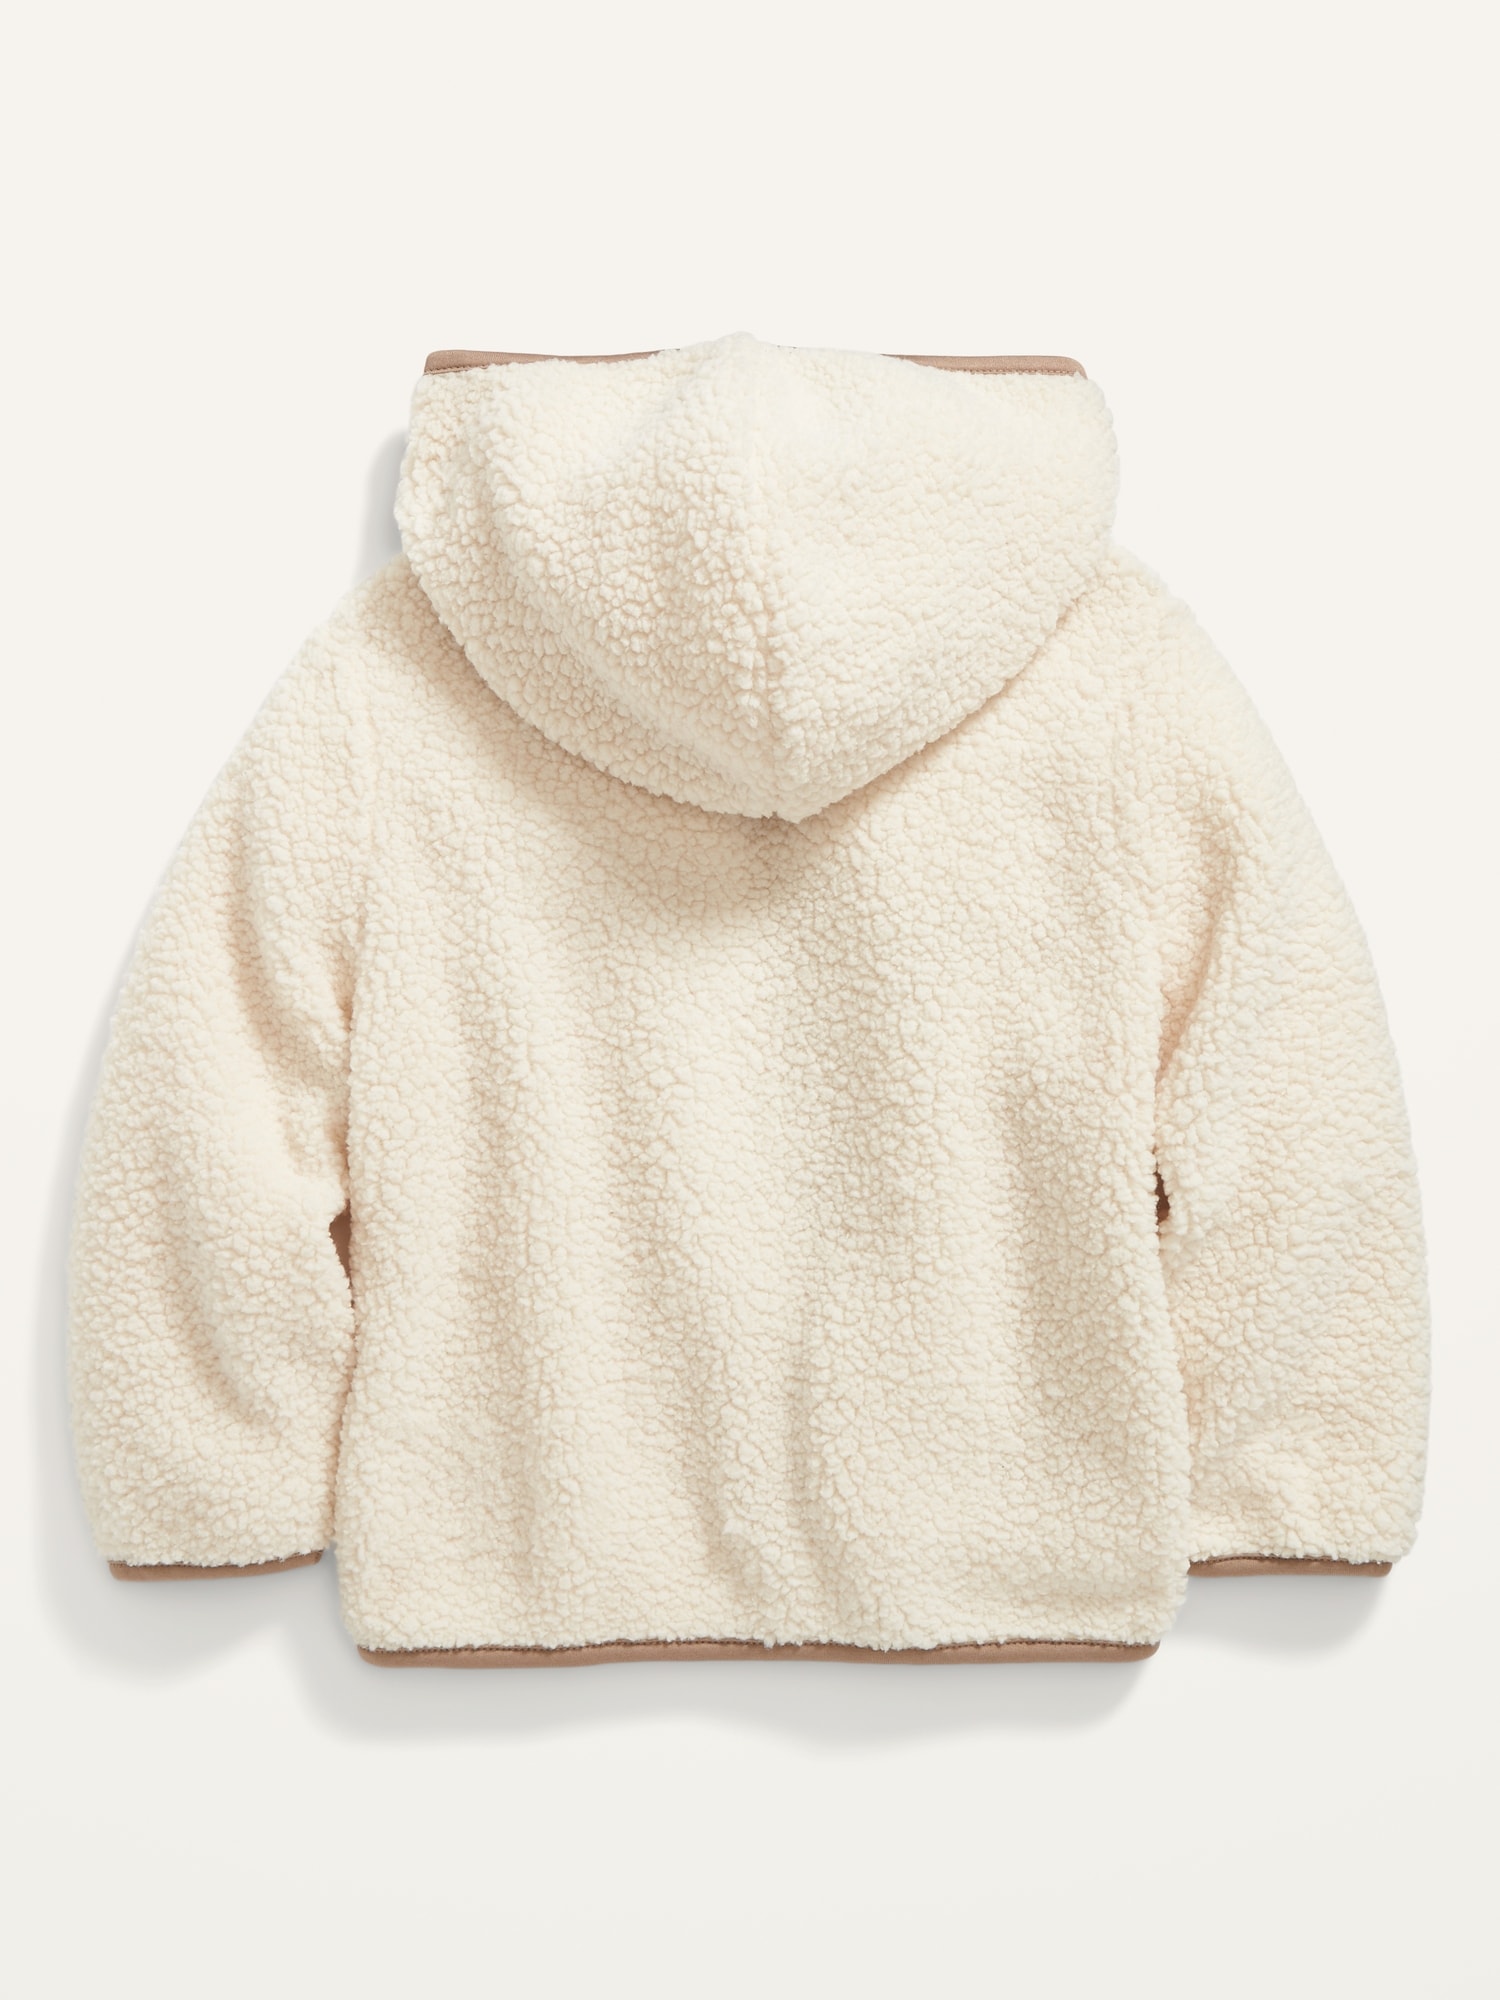 Unisex Hooded Sherpa Jacket for Toddler | Old Navy